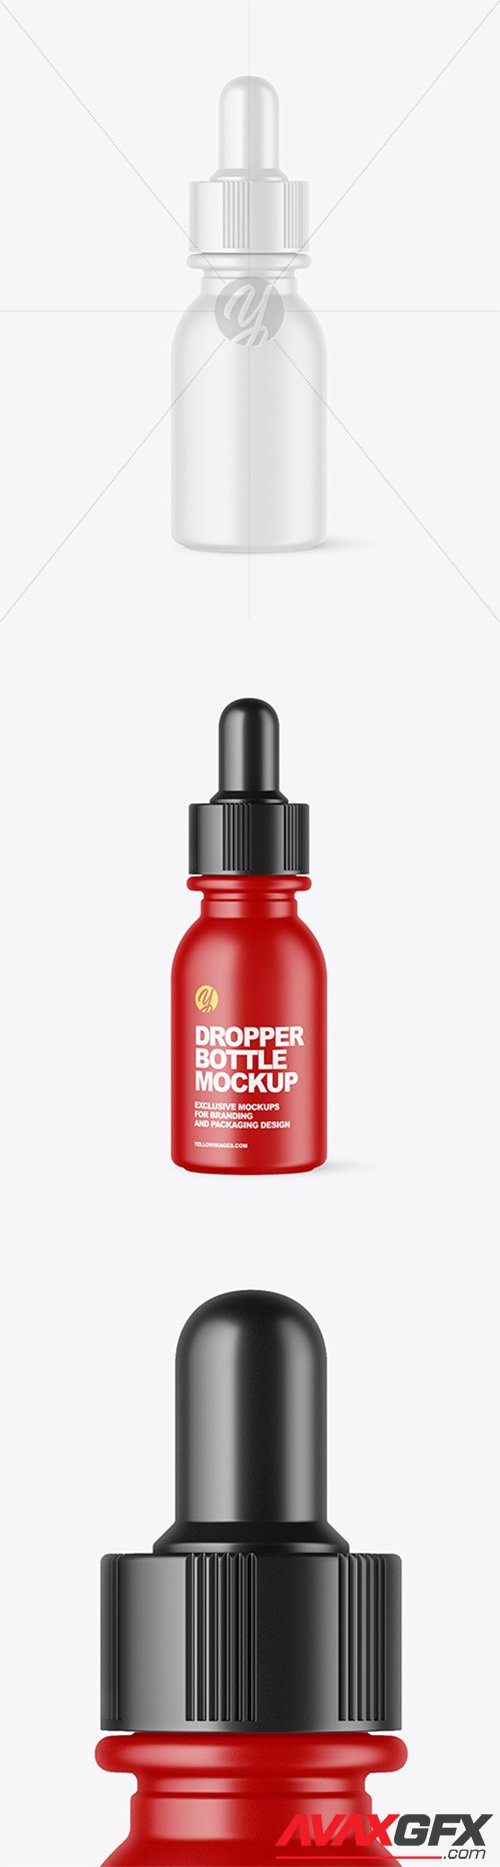 Download Matte Dropper Bottle Mockup 65345 » AVAXGFX - All Downloads that You Need in One Place! Graphic ...